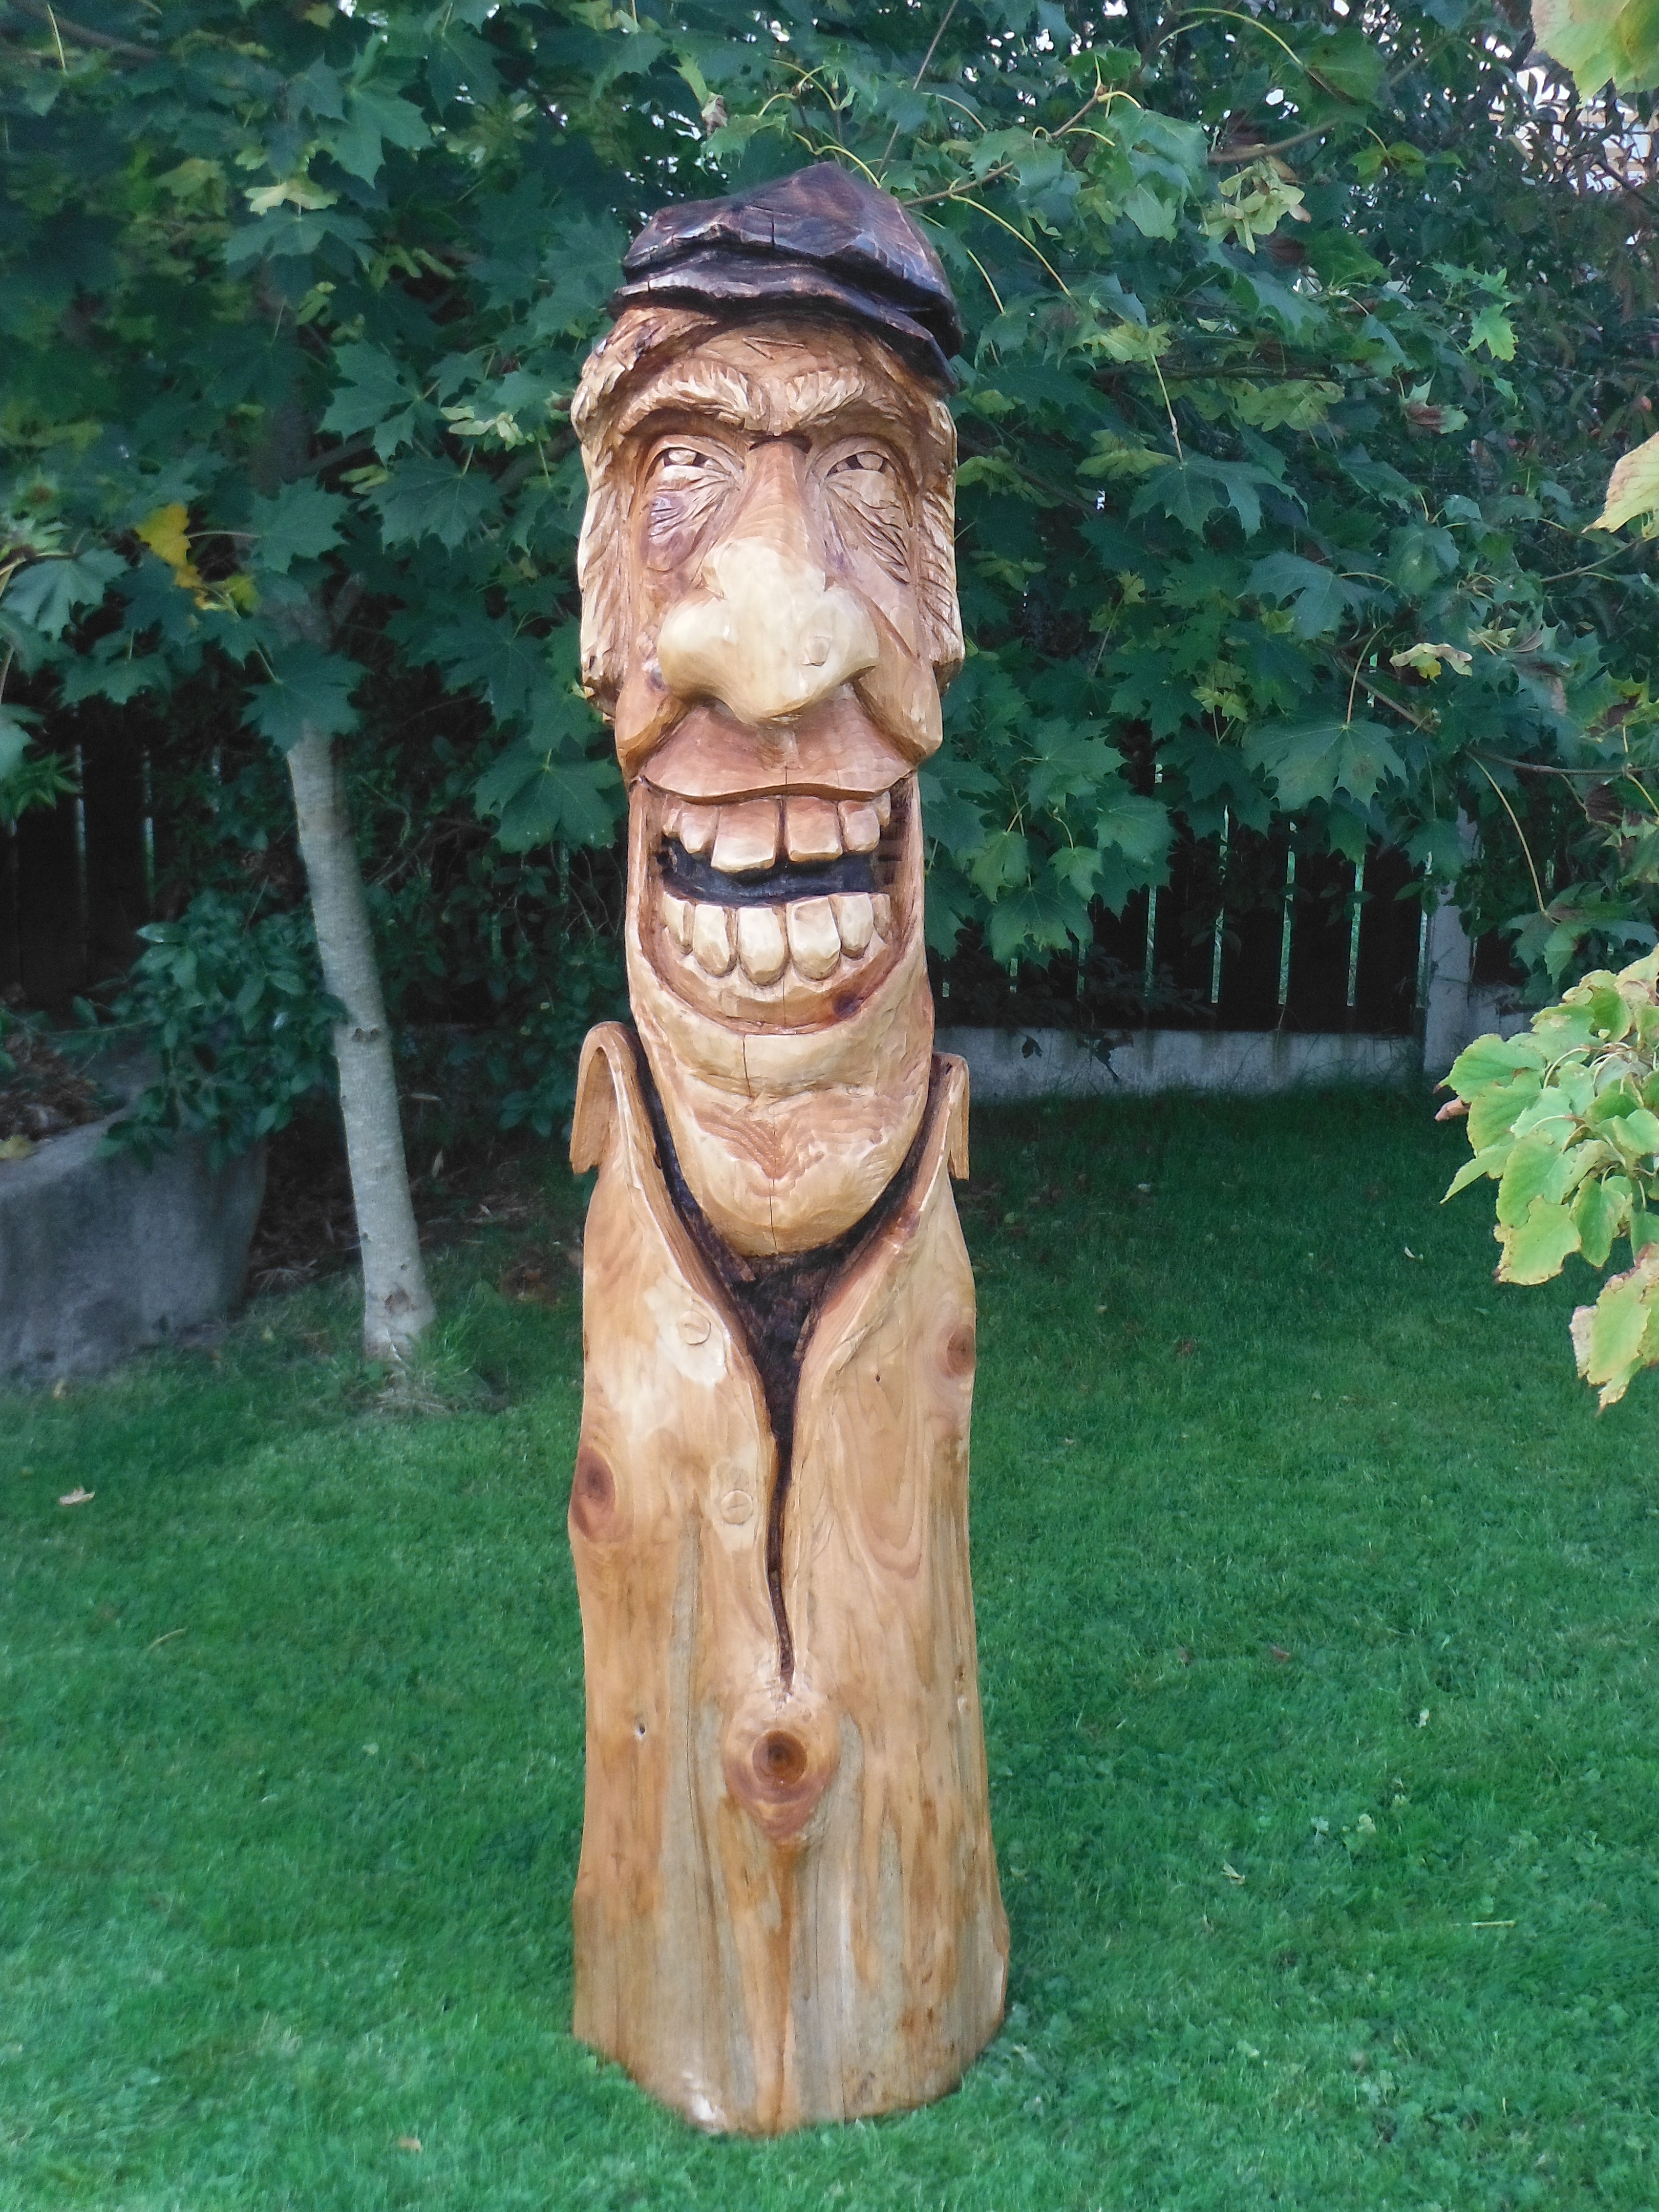 Caricature Carving